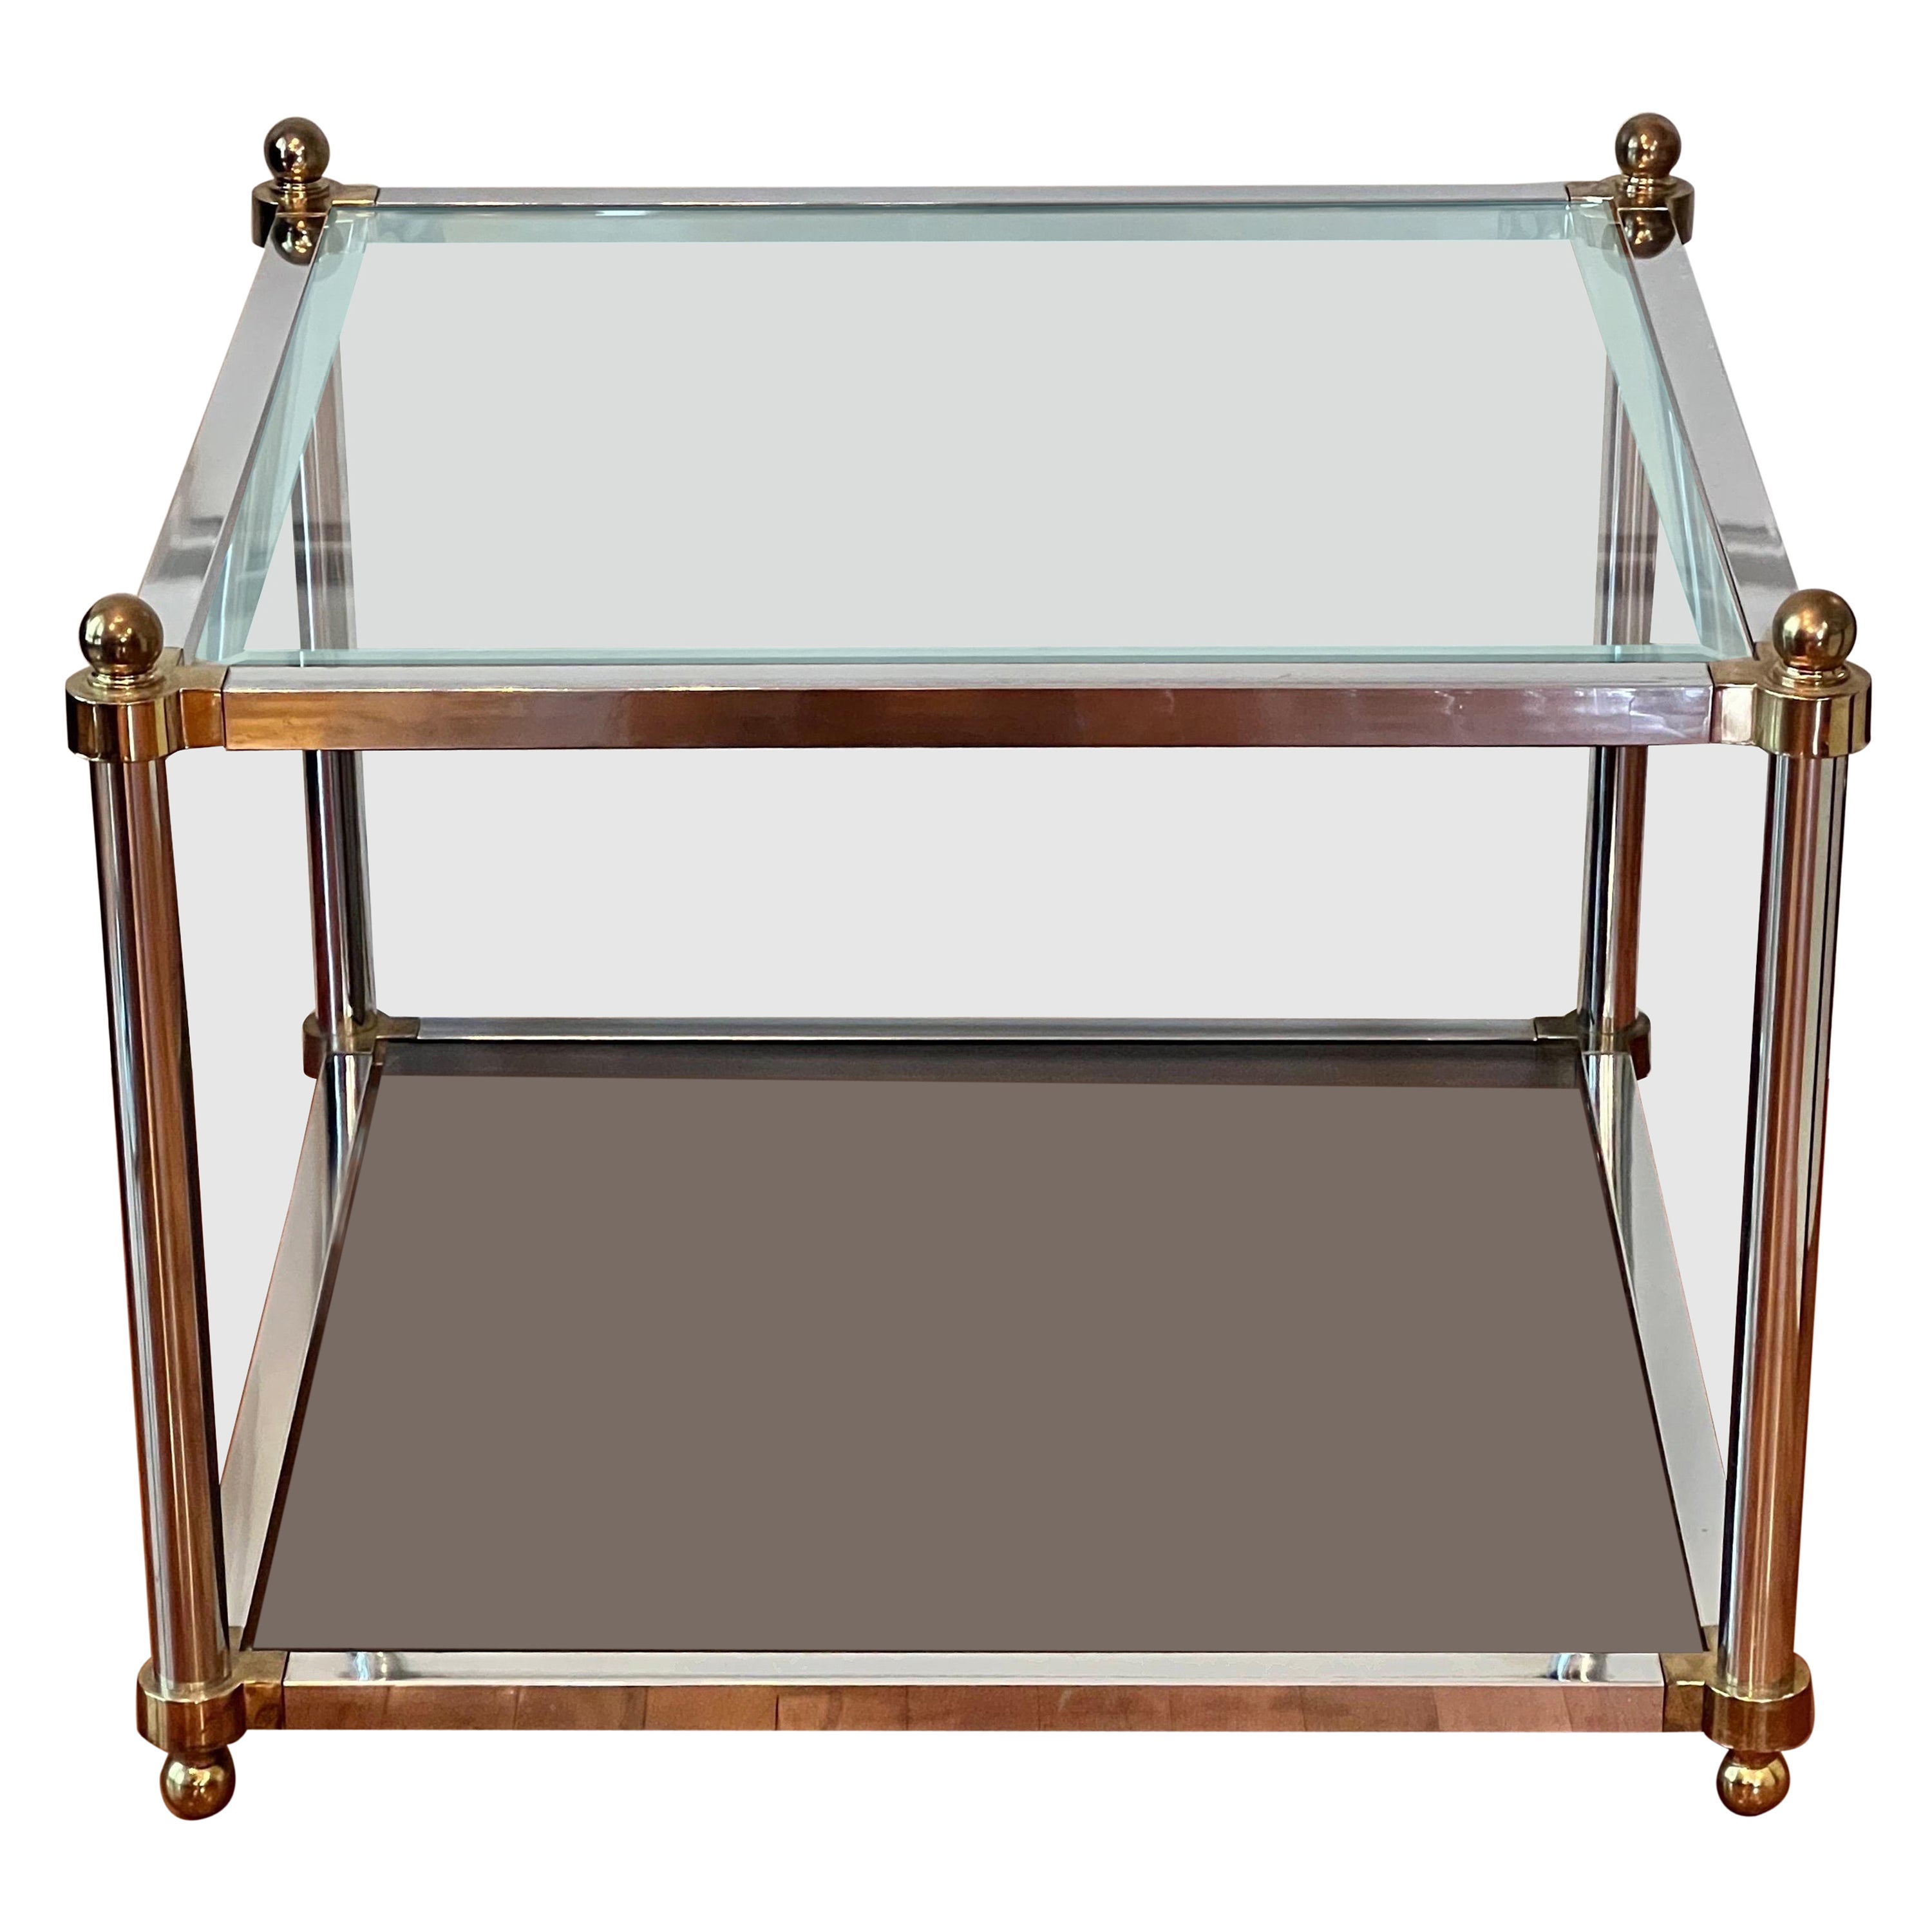 Midcentury Maison Jansen Style Brass and Polished Steel Square Cocktail Table For Sale